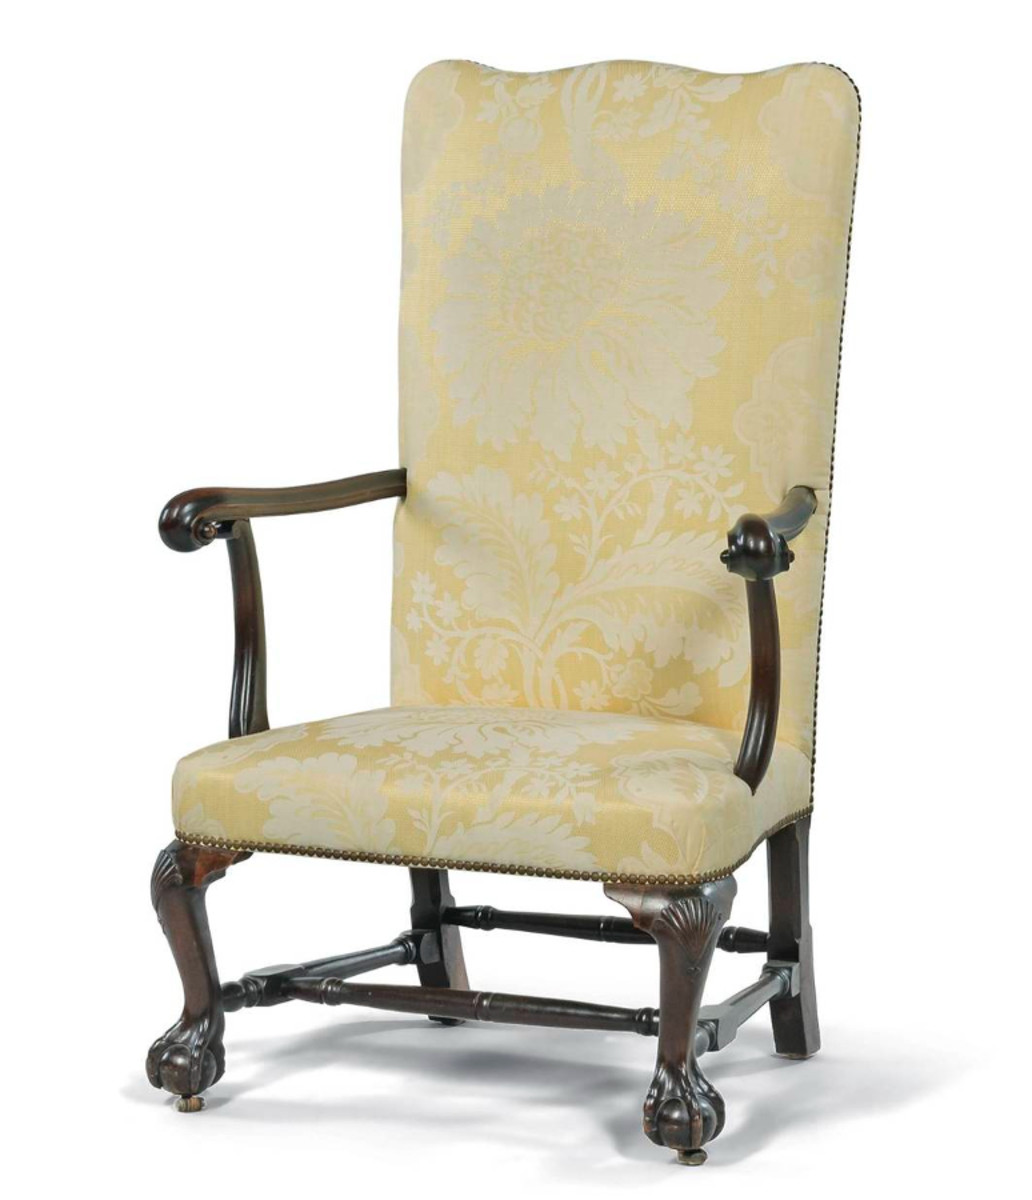 Chippendale carved mahogany open armchair, probably Providence, Rhode Island, c. 1765. The serpentine crest above an over-upholstered back and seat, with molded and shaped arms ending in scrolled handholds on shaped supports, the seat frame joining frontal cabriole legs with shell and bellflower-carved knees and claw-and-ball feet. Estimate: $50,000-$100,000.